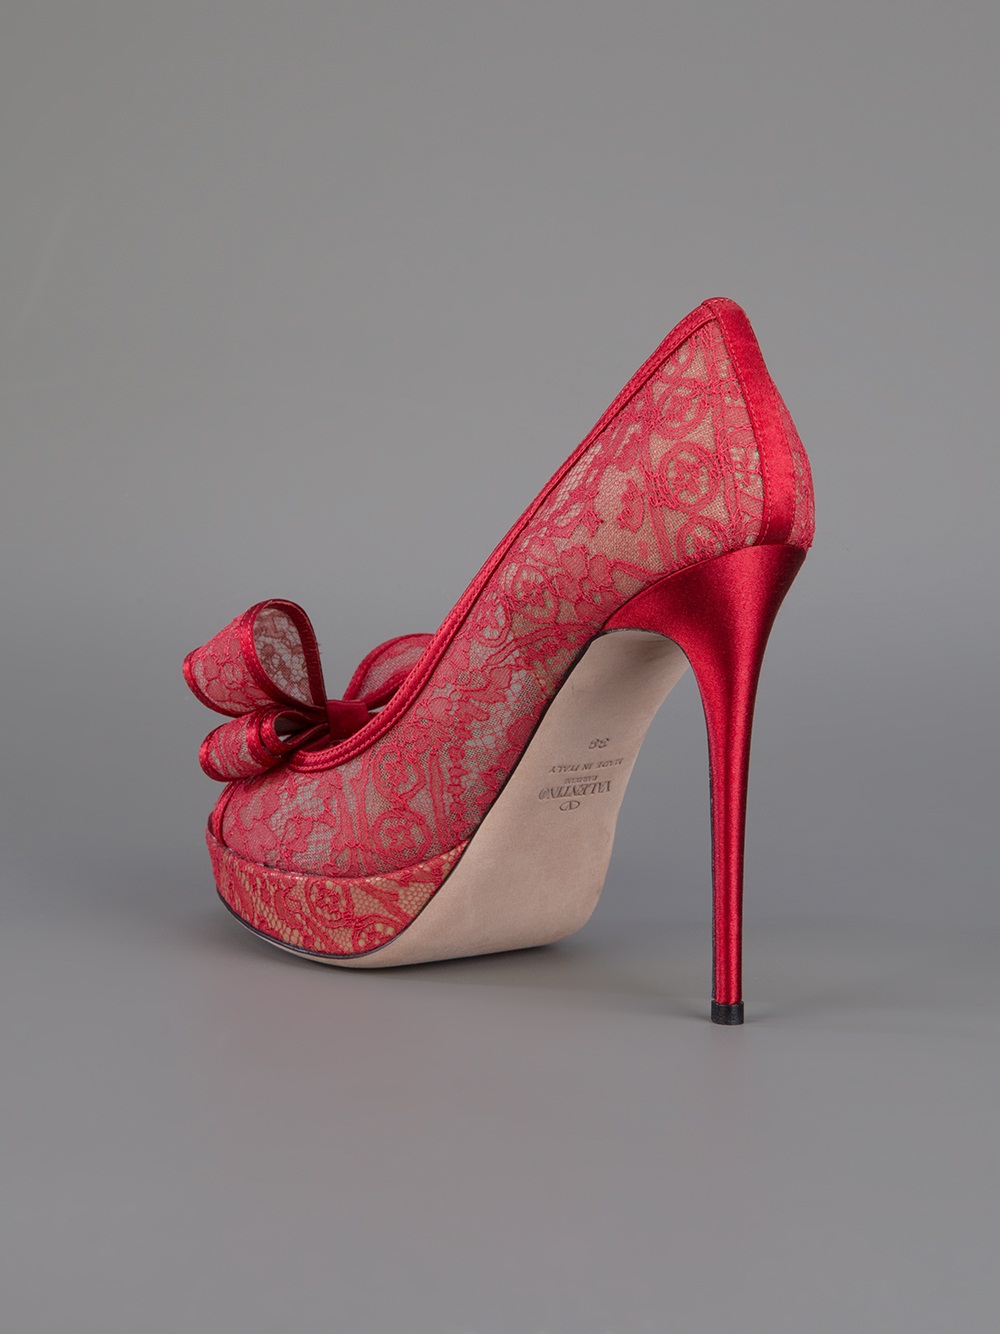 Lyst - Valentino Bow Detail Pump in Red